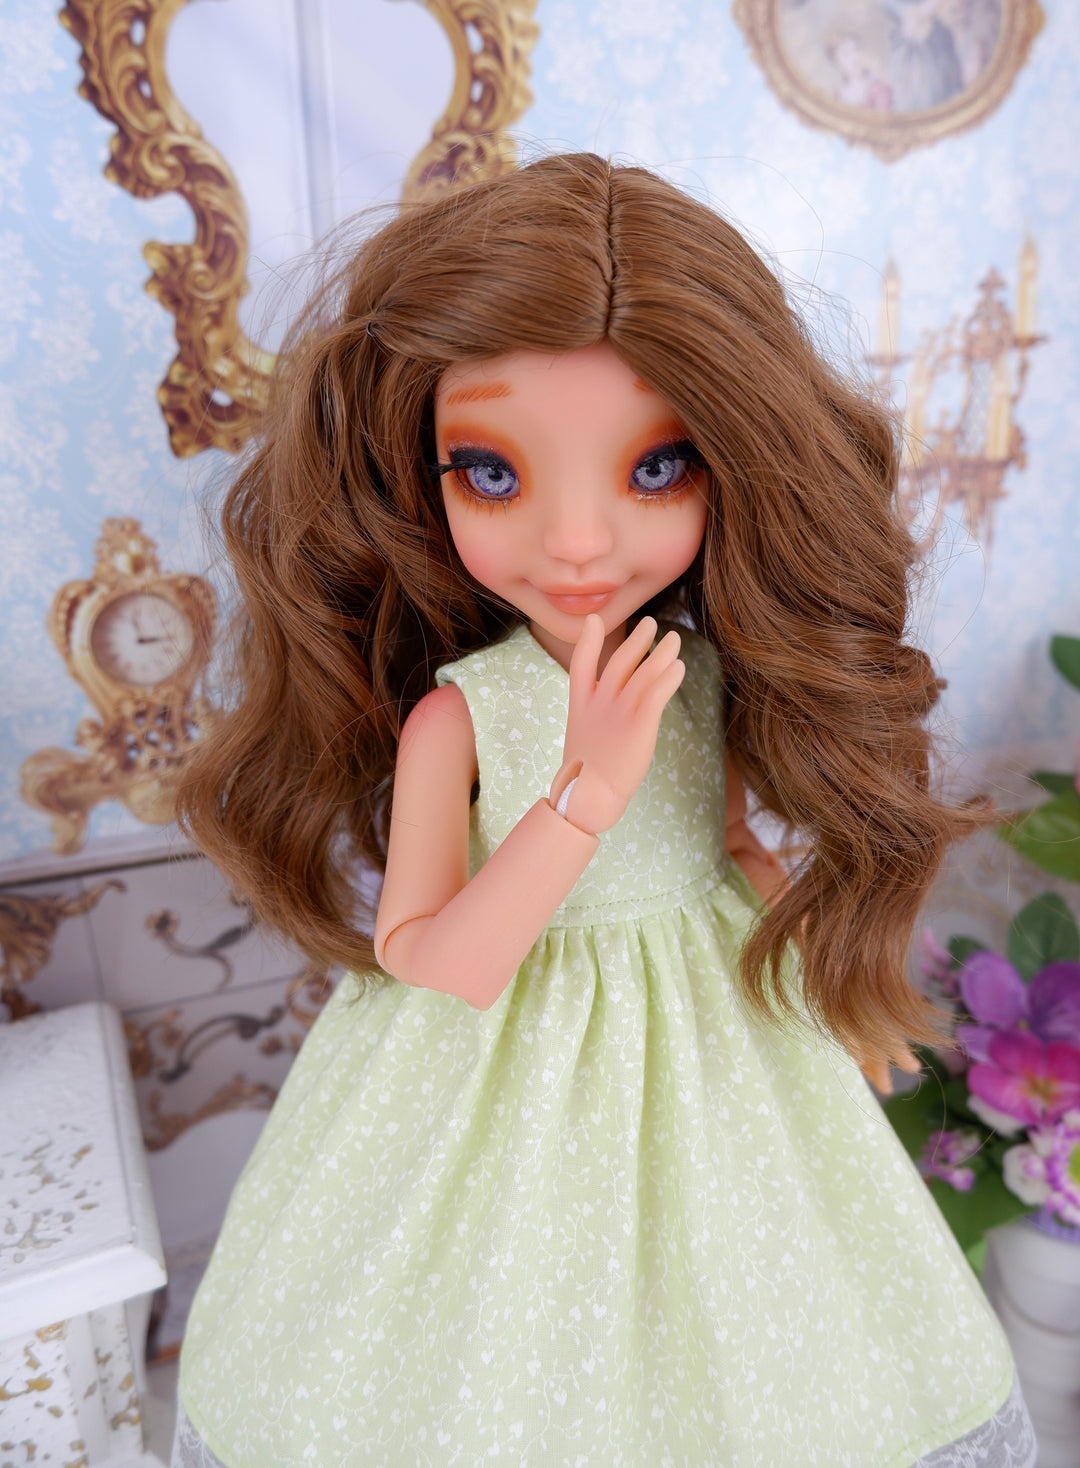 Green Heart Vine - dress with shoes for Ava BJD